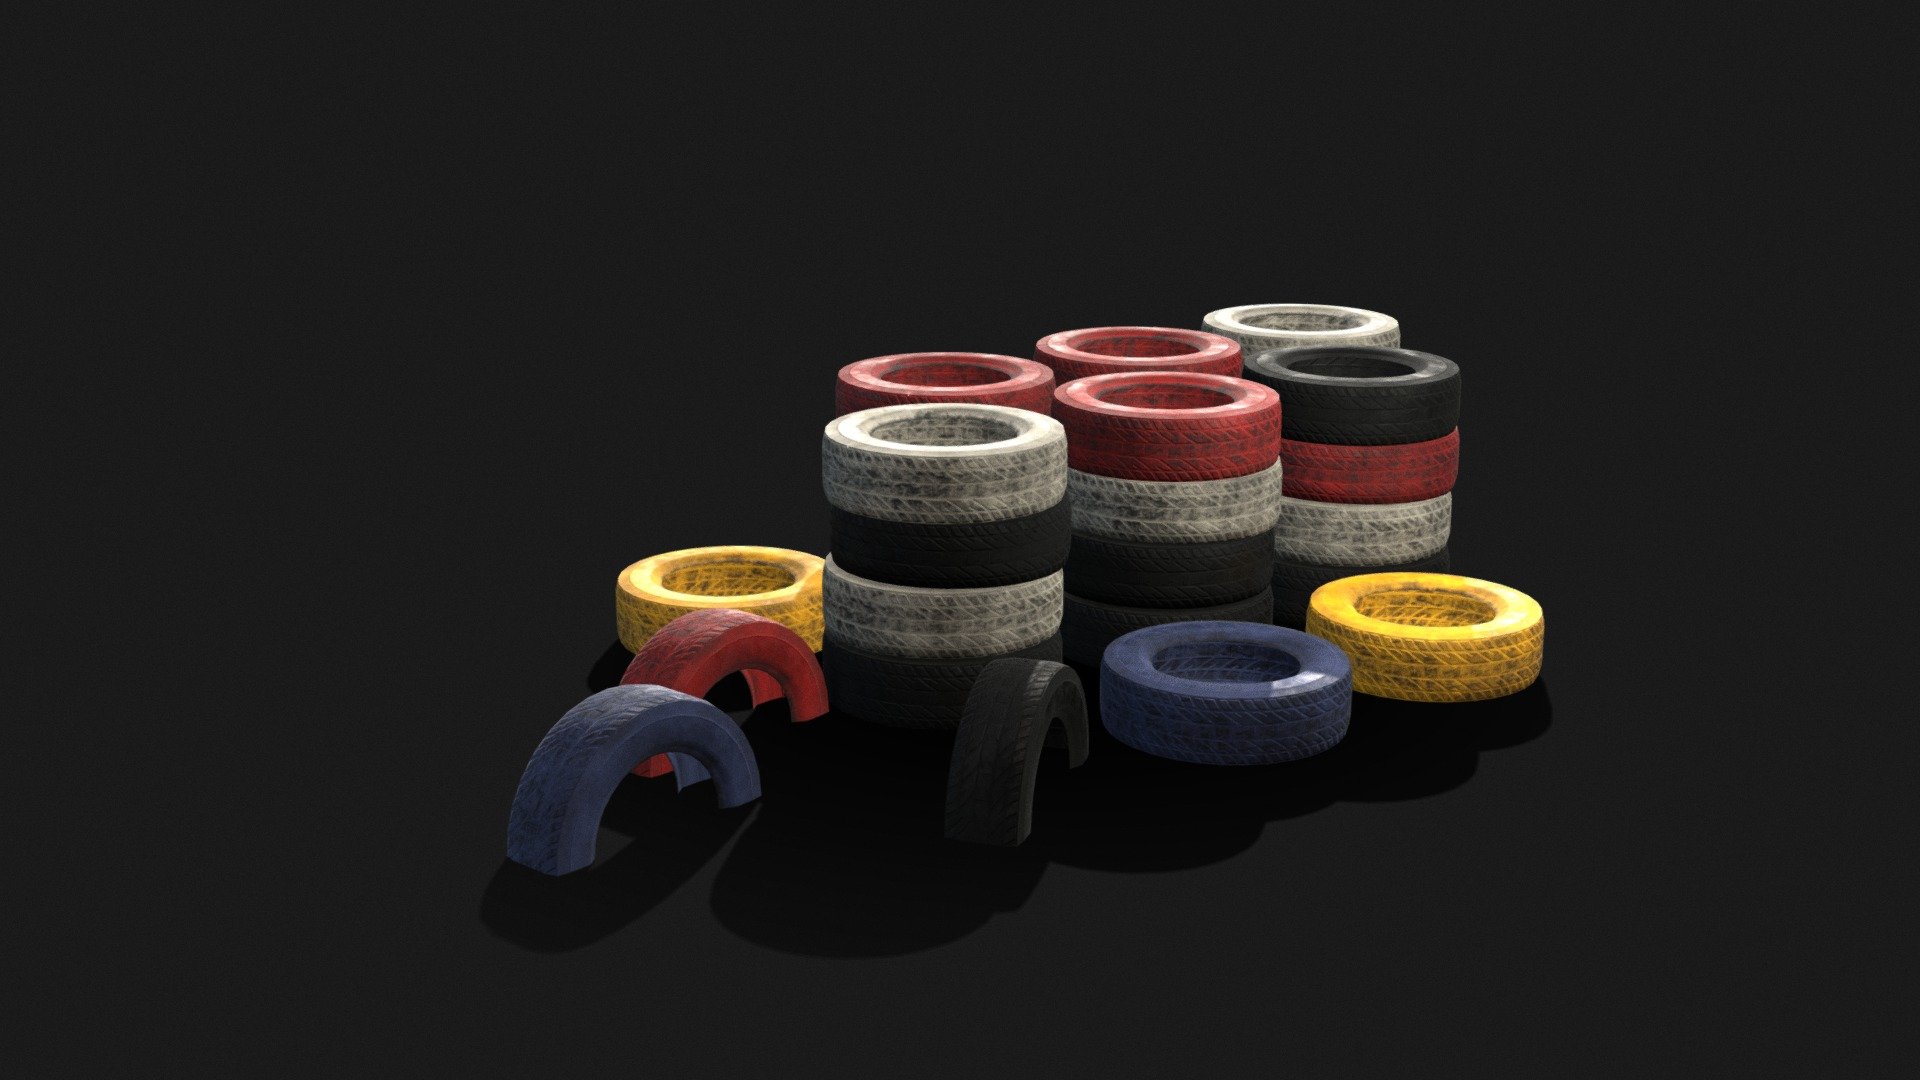 Made in Blender, texture is 1024x1024 (every textures is made by me) - Tyre Stack Barrier Wall - 3D model by diime02 3d model